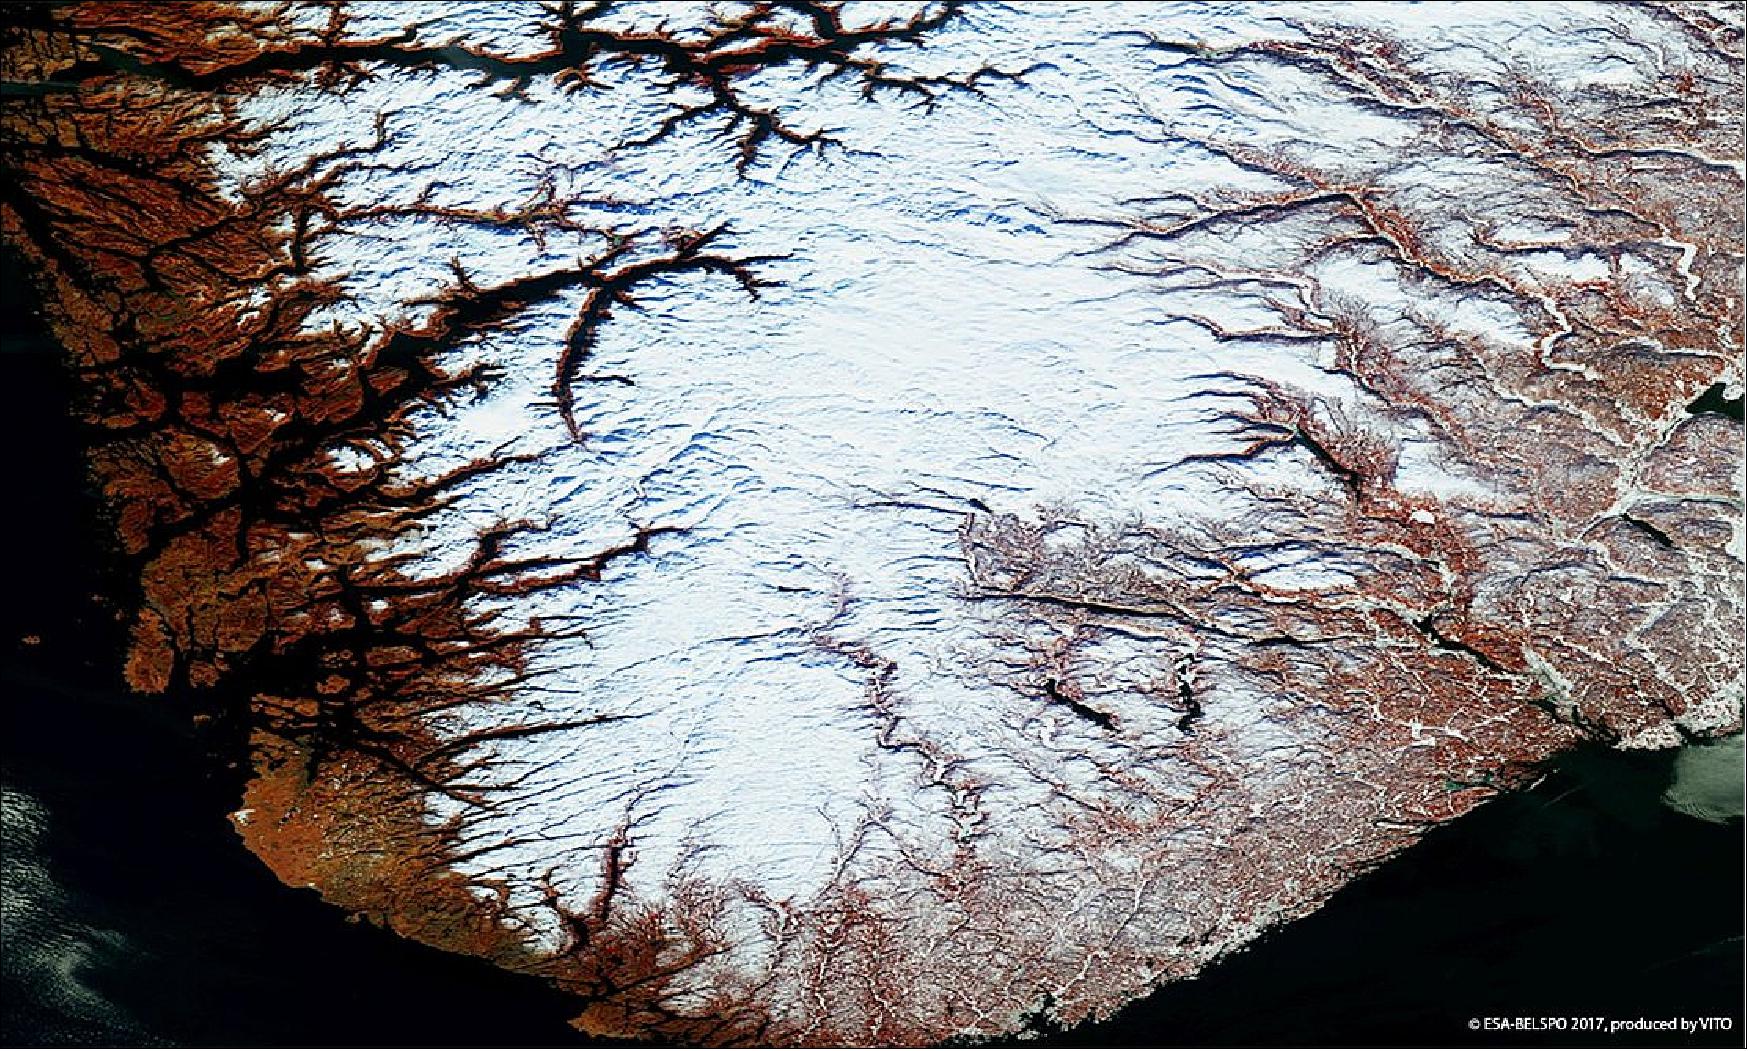 Figure 40: Norwegian fjords imaged by PROBA-V, the image was acquired on 14 February 2017 (image credit: ESA/BELSPO – produced by VITO)